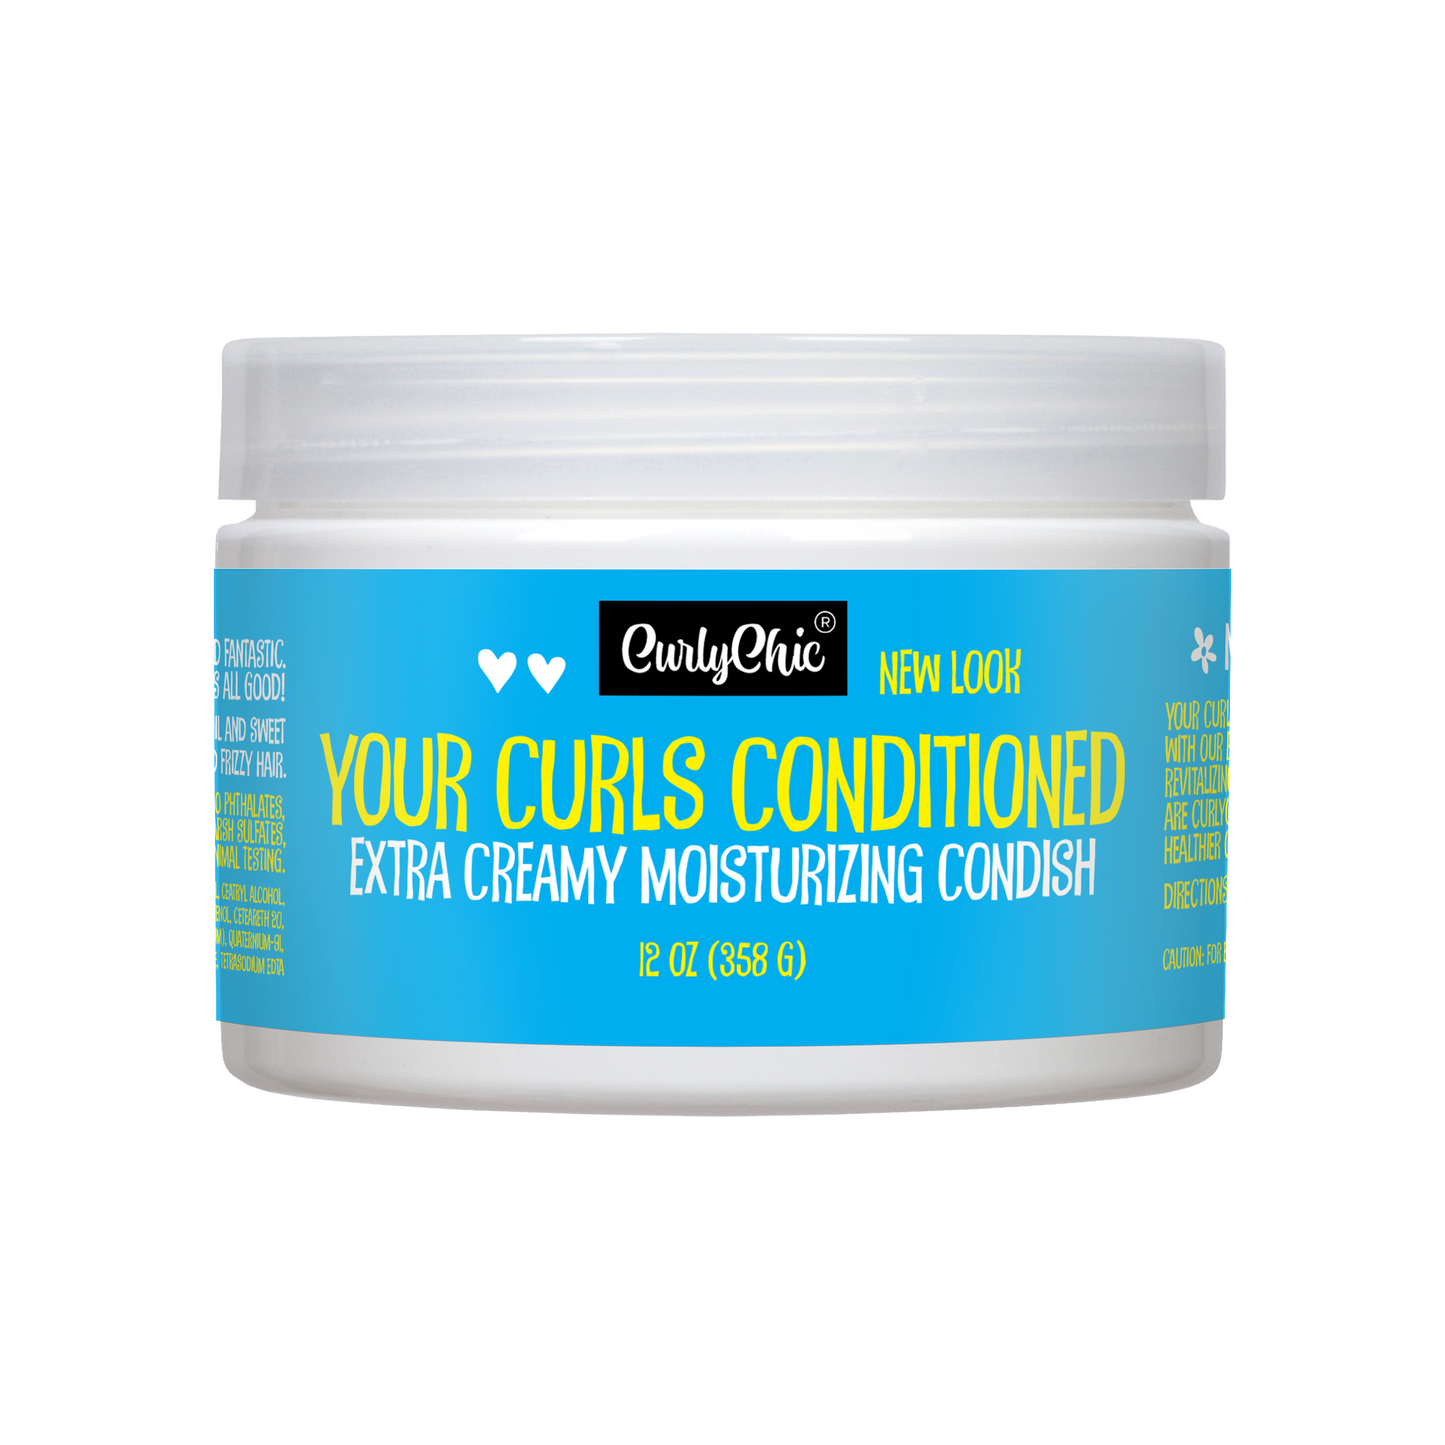 Your Curls Conditioned